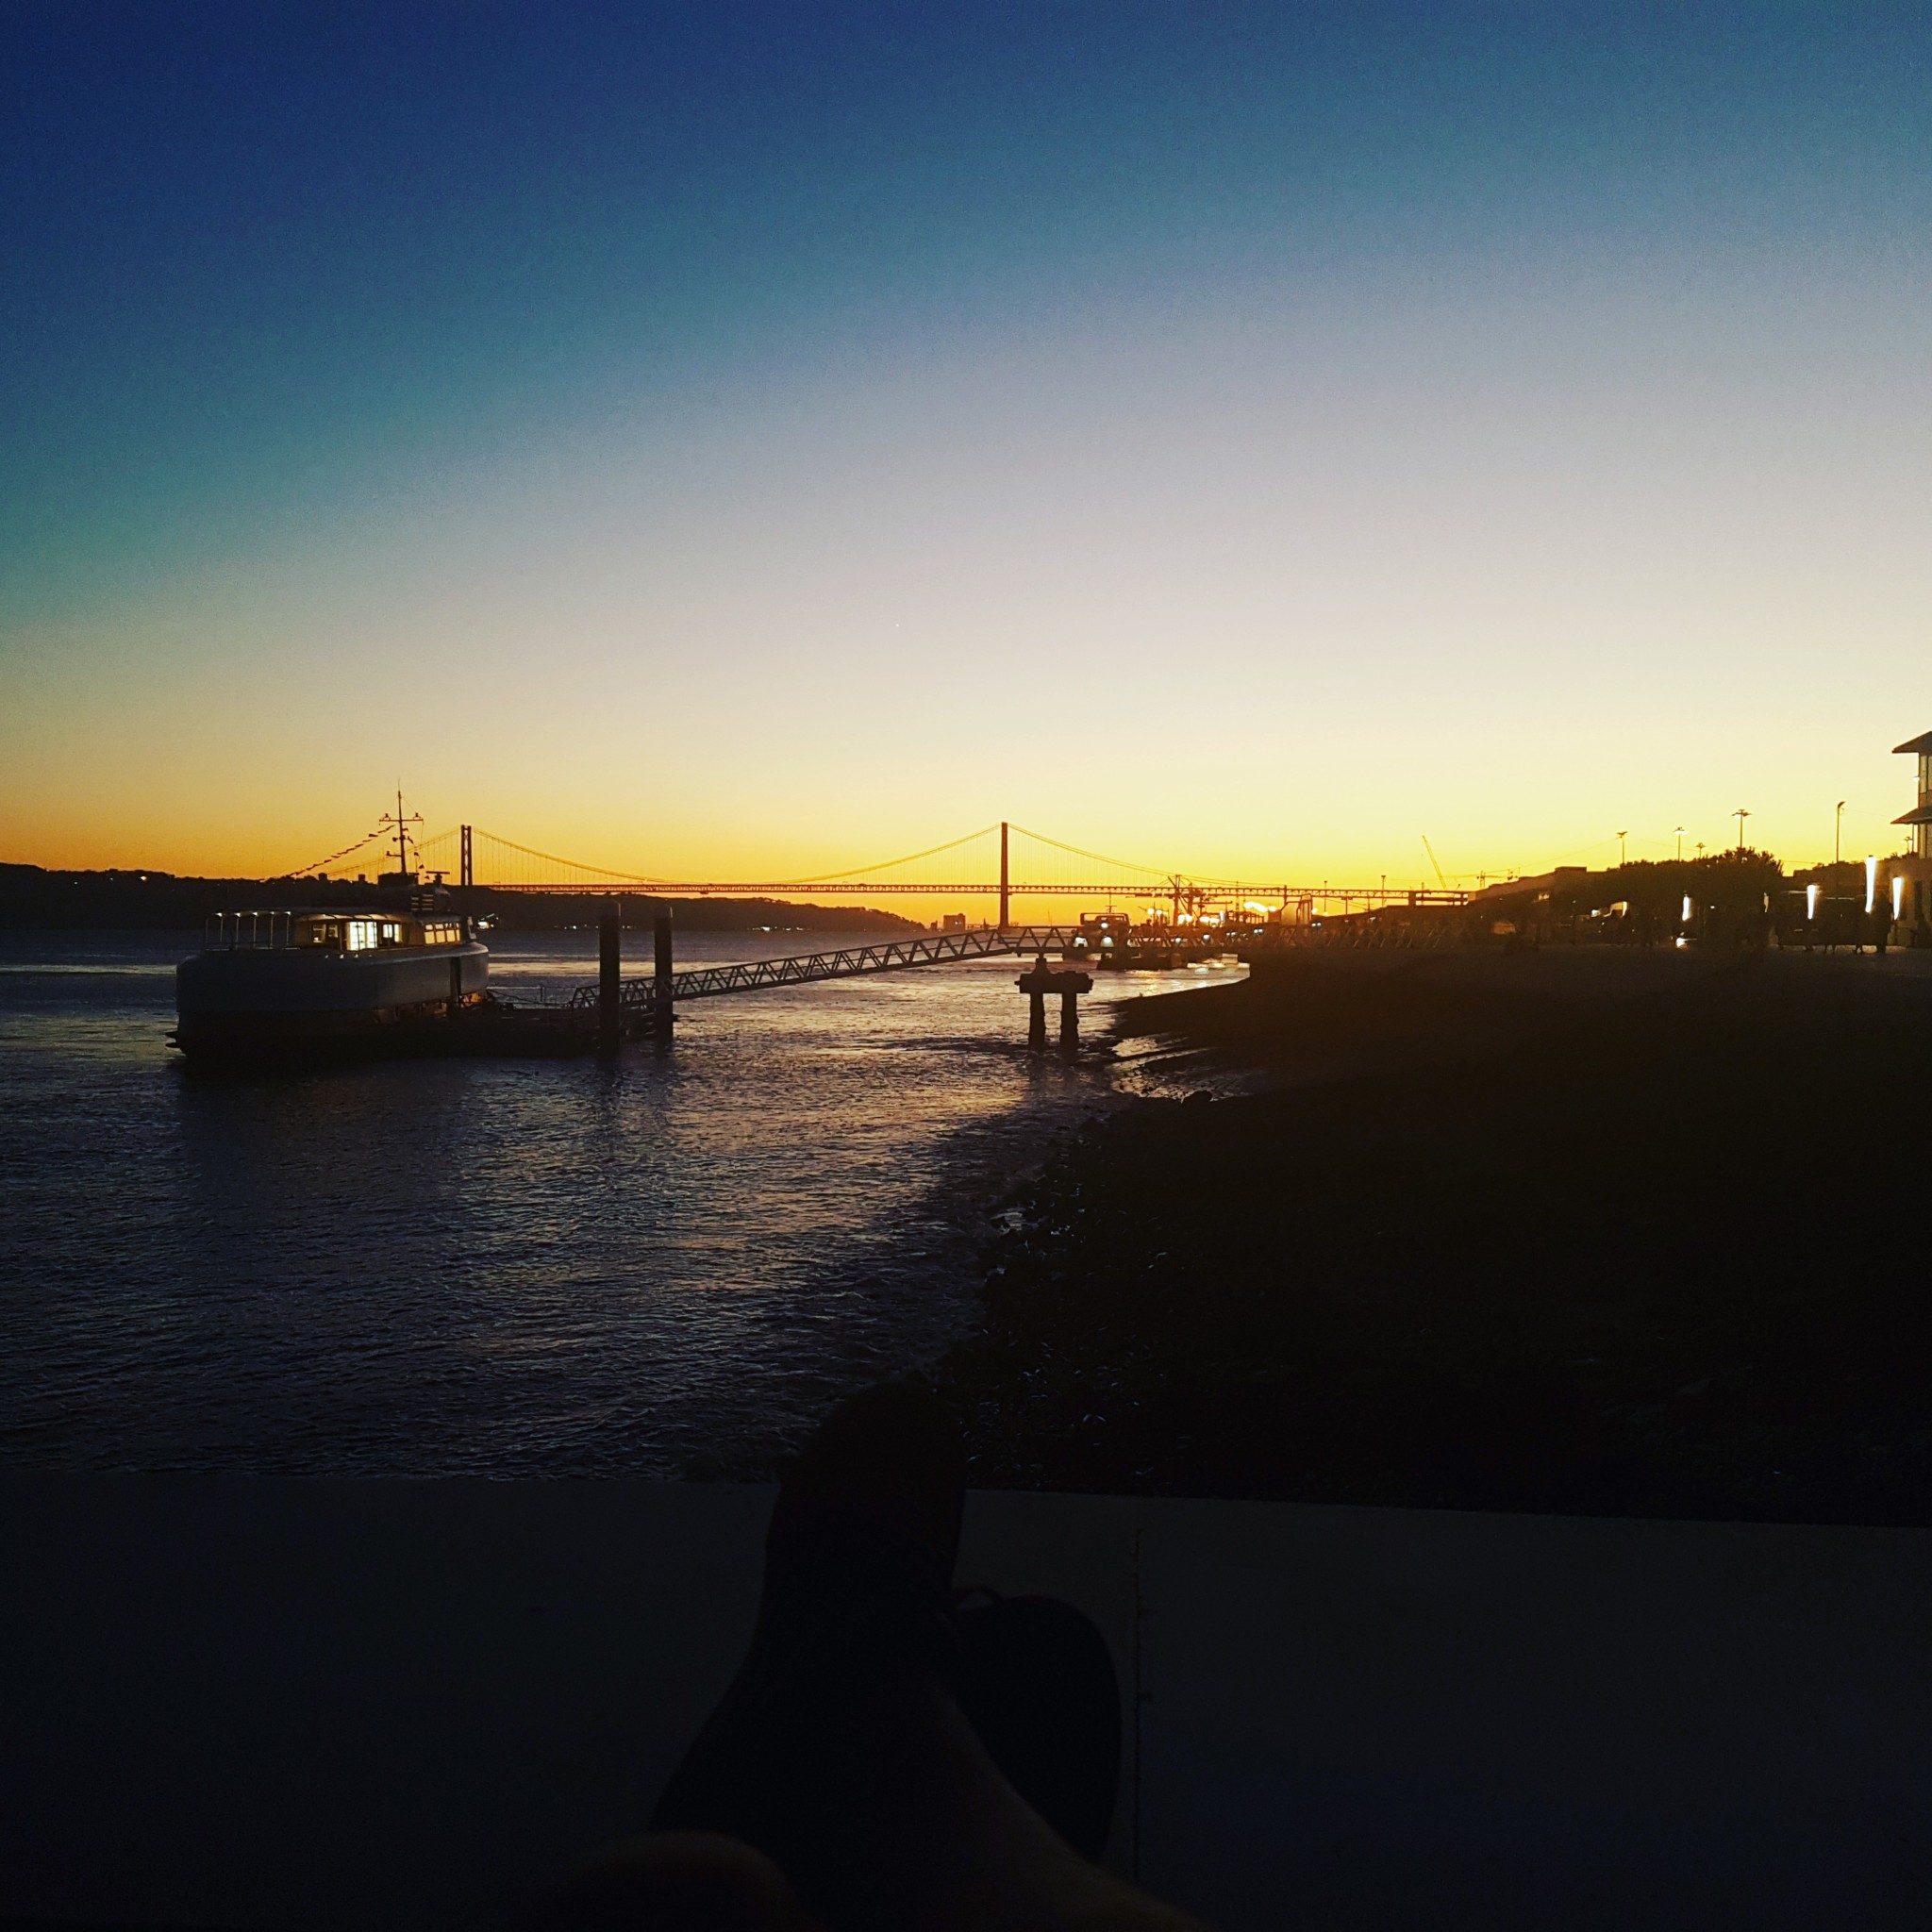 I will Miss The Wonderful Sunsets in Lisbon